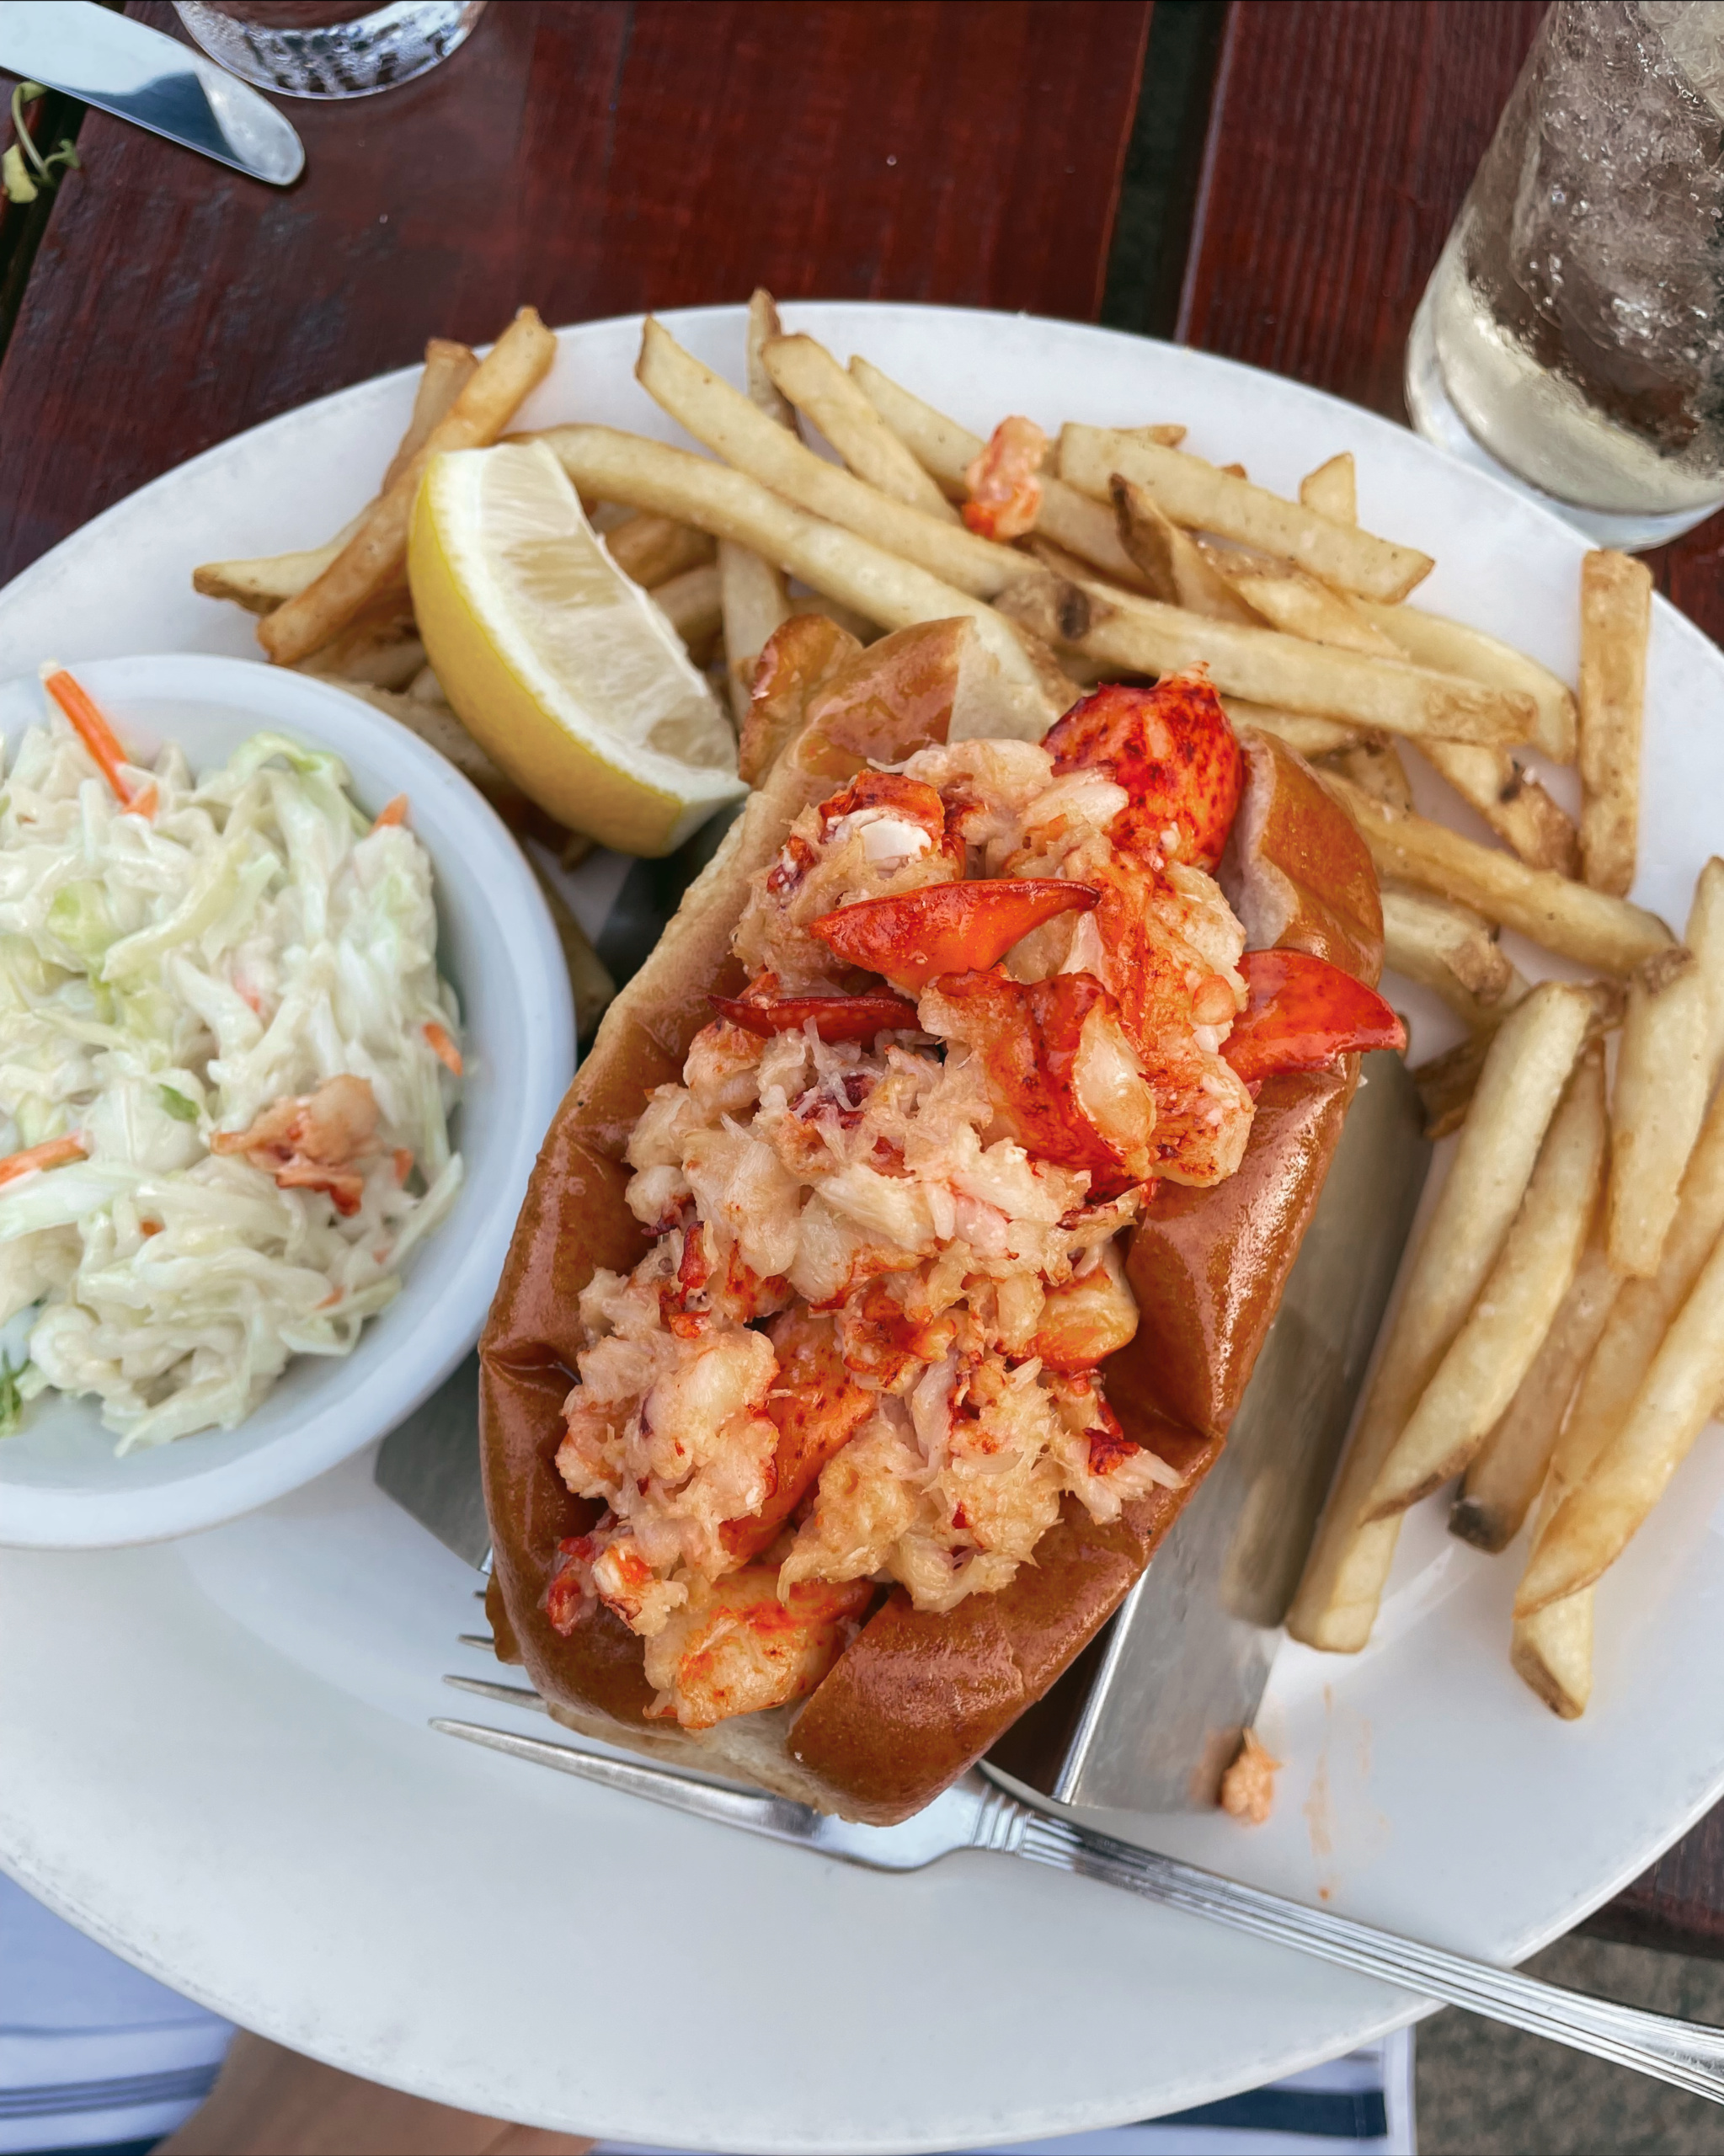 Everything You Need To Host a Coastal Bachelorette Weekend | Cape Cod Bachelorette | Wholesome Bachelorette Ideas | Cape Cad Massachusetts Bachelorette Itinerary | What To Do In Cape Cod for A Bachelorette Party | New England Bachelorette | Coastal Bachelorette Party Theme | Bachelorette Themes | How To Host A Coastal Bachelorette | Caroline’s Bar and Grill North Eastham MA Lobster Roll | Simply by Simone